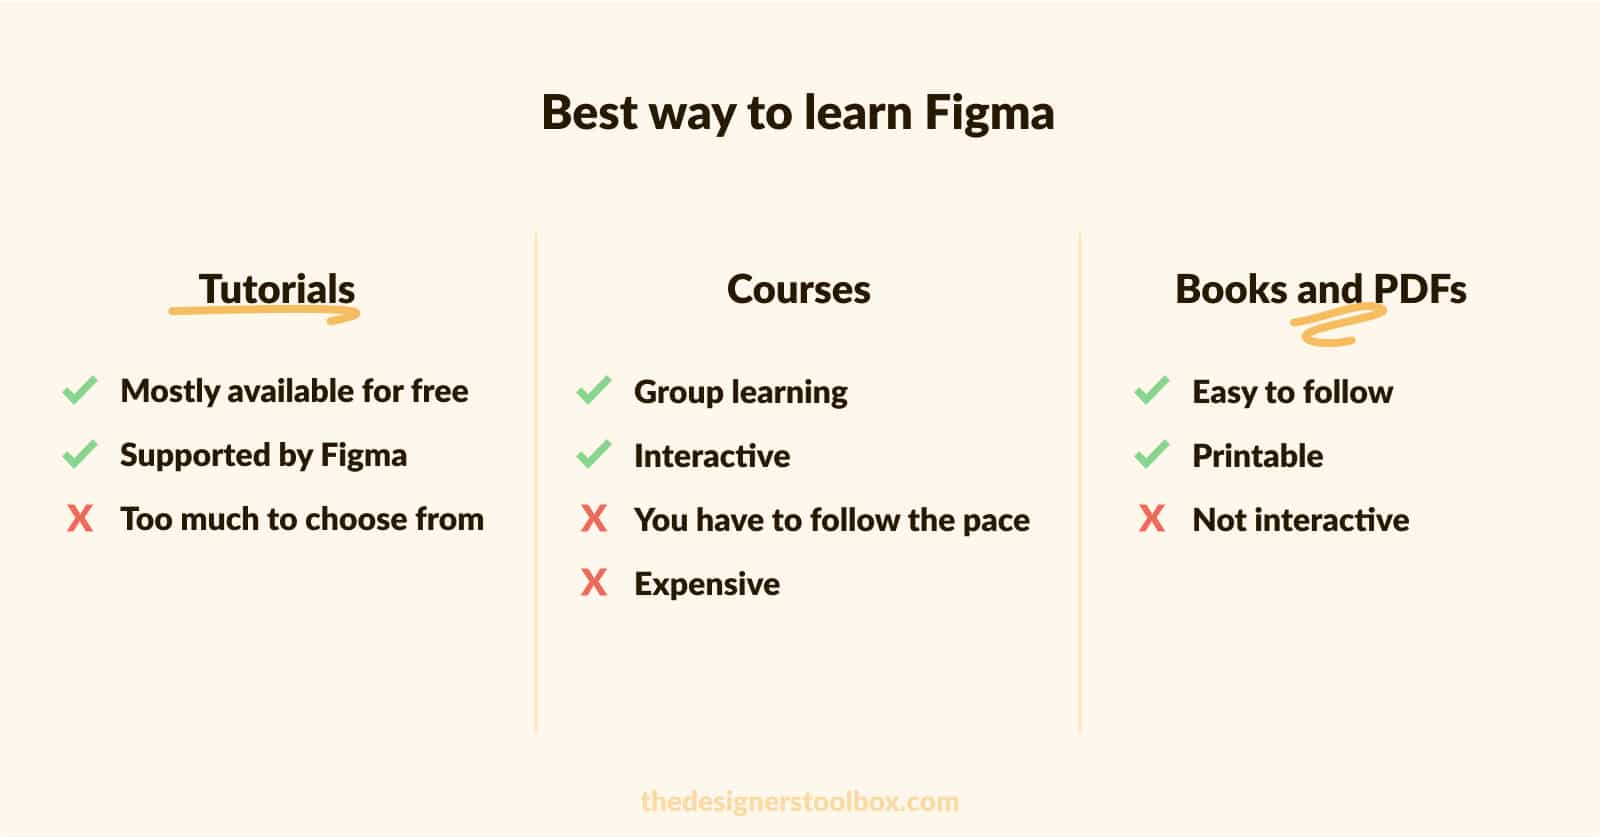 Comparing books, tutorials, and courses to see what is the best way to learn Figma